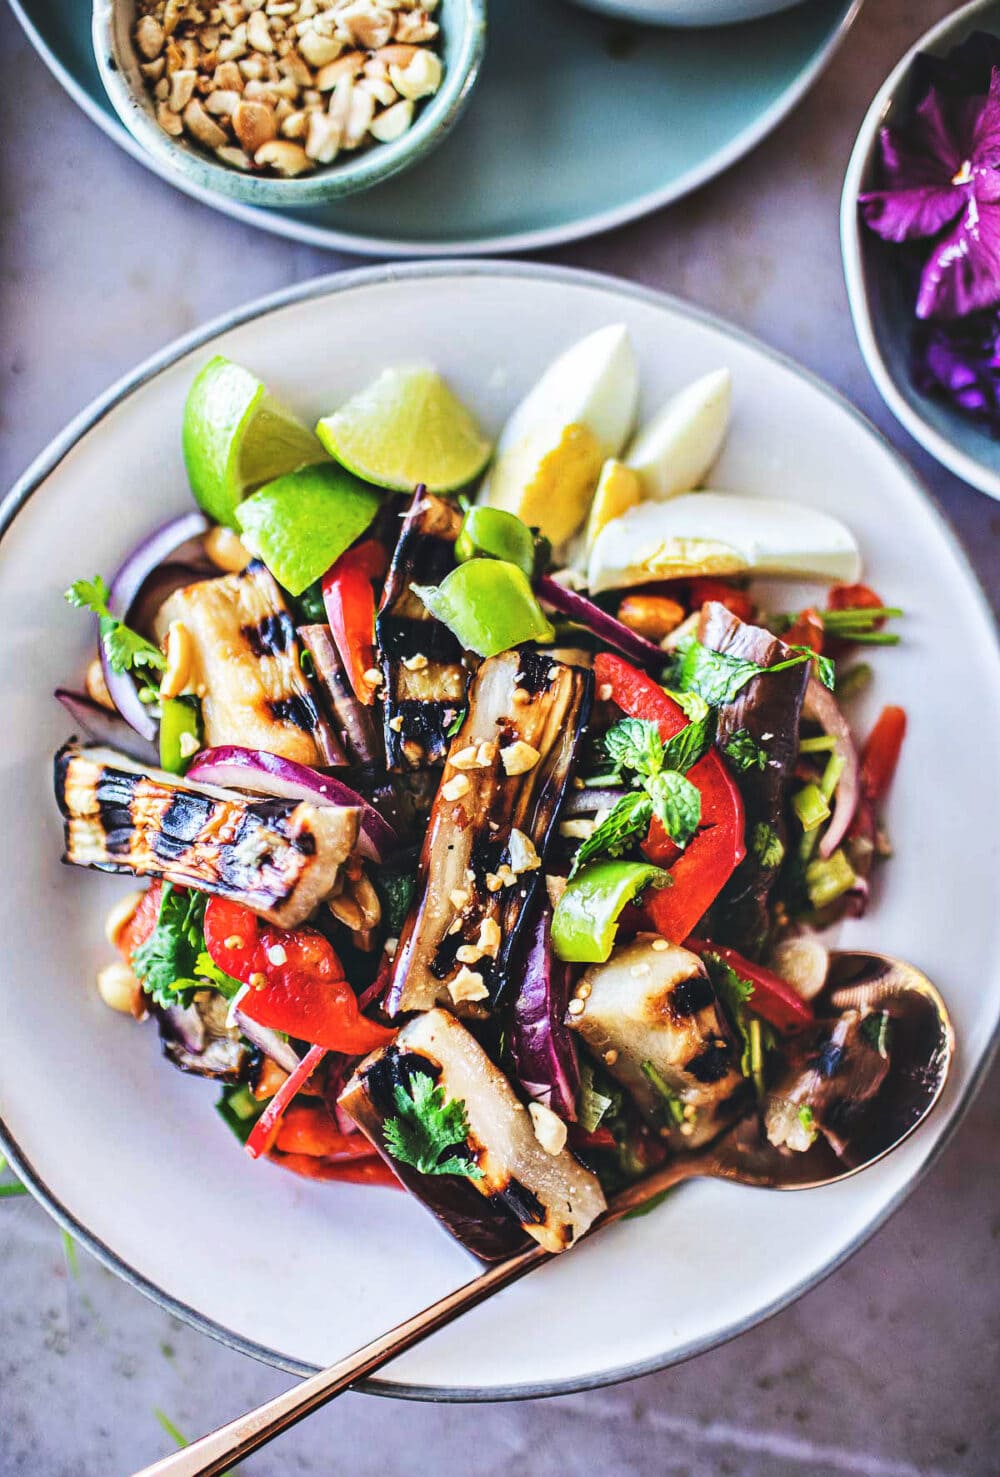 This flavorful Thai Grilled Eggplant Salad is simple, light, and refreshing with a tangy, umami dressing made from fresh lime juice and fish sauce. Healthy and tasty, this Thai Salad comes together in 35 minutes! (Vegan-adaptable) Serve it with jasmine rice and make it a meal.